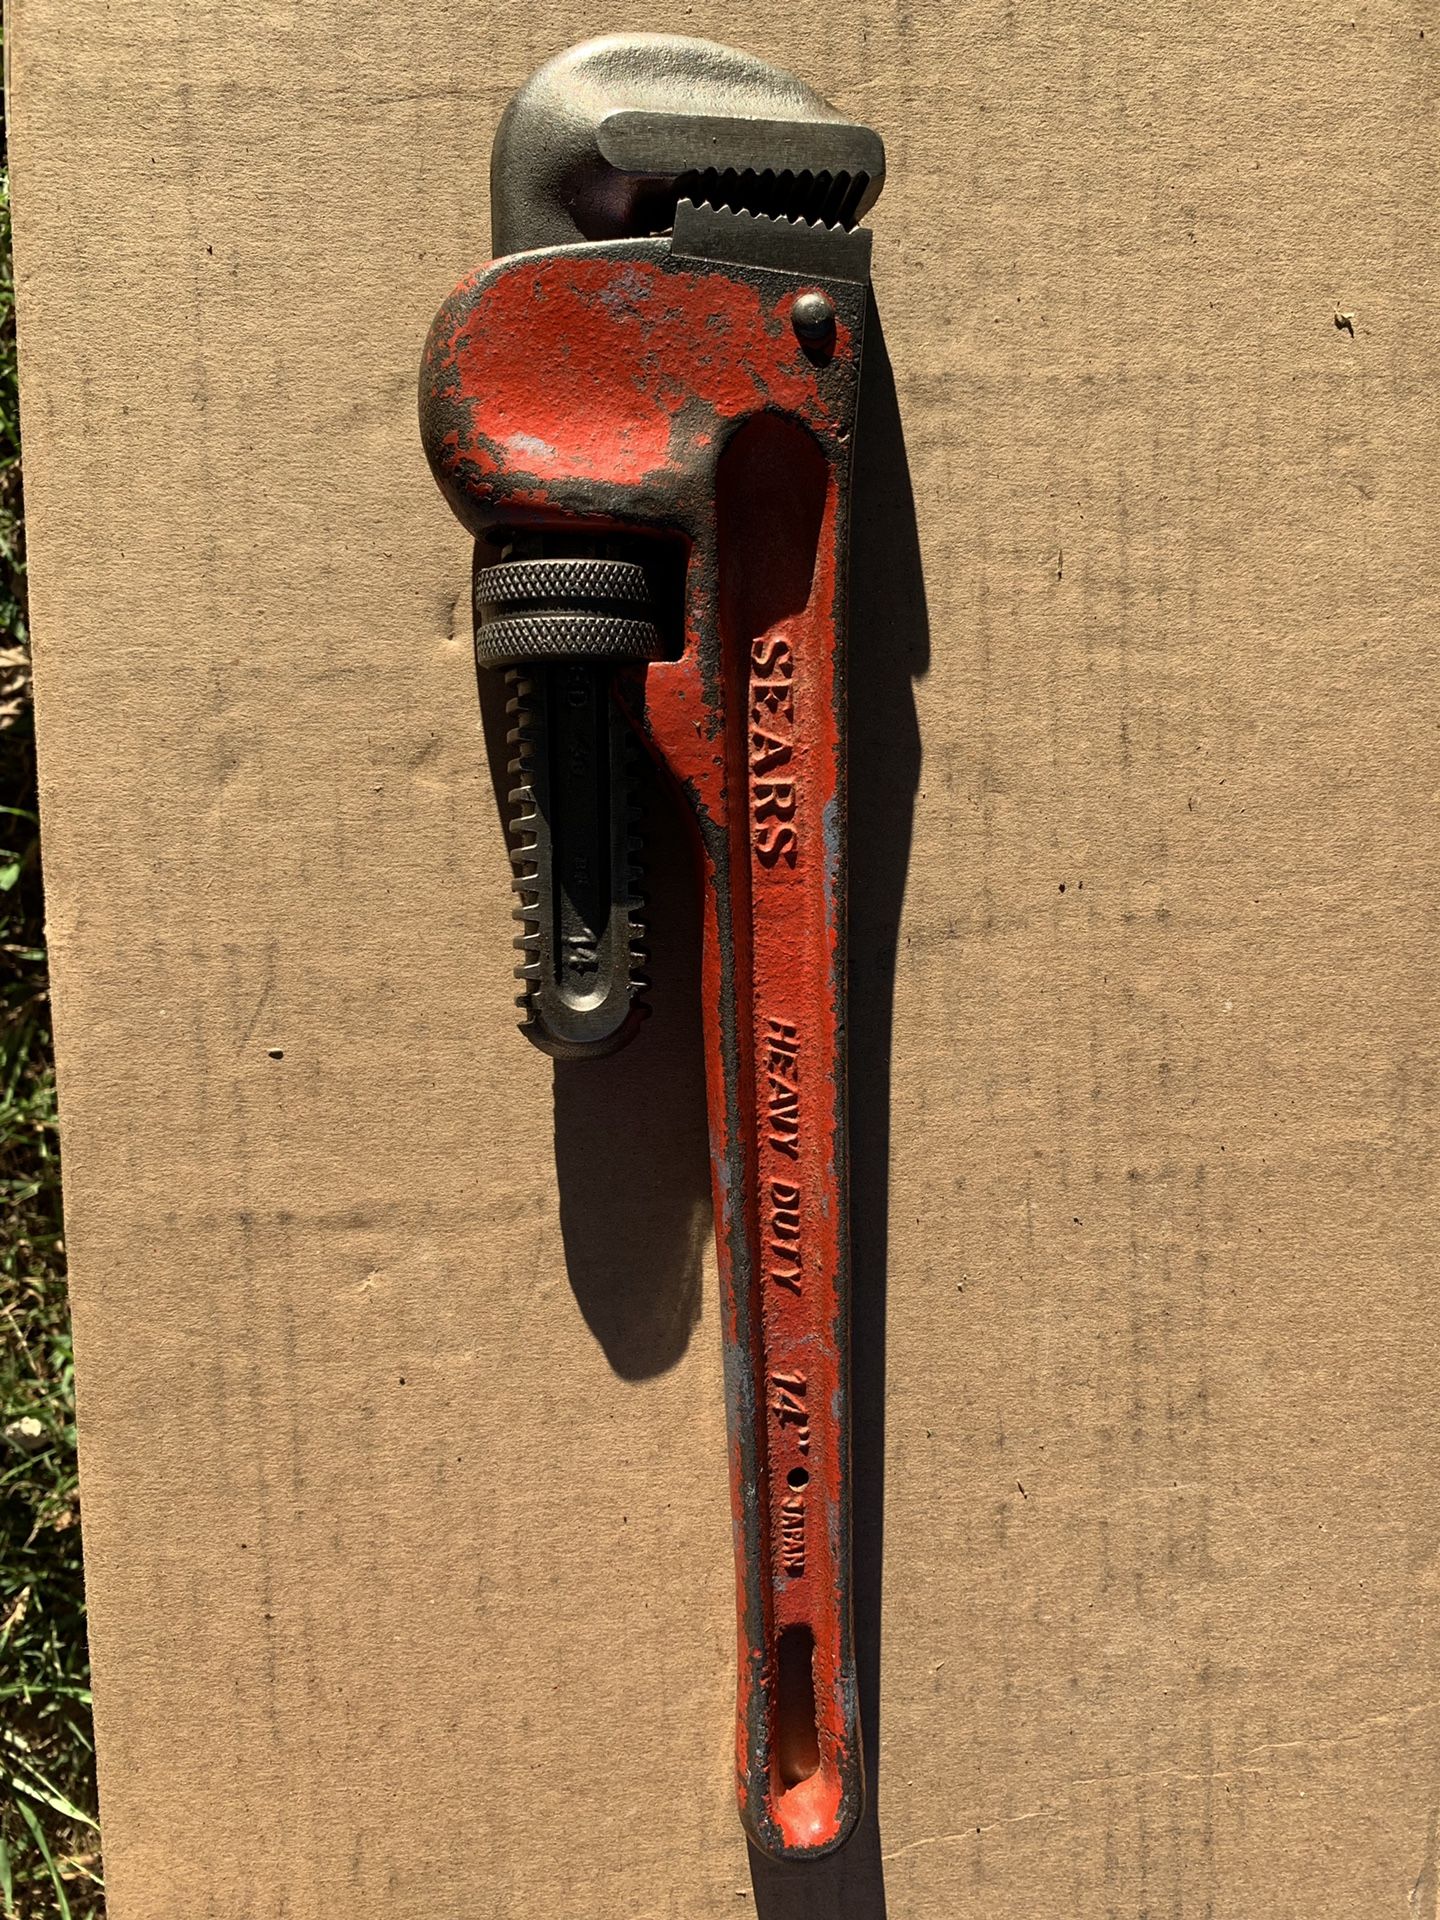 Sears 14” steel pipe wrench